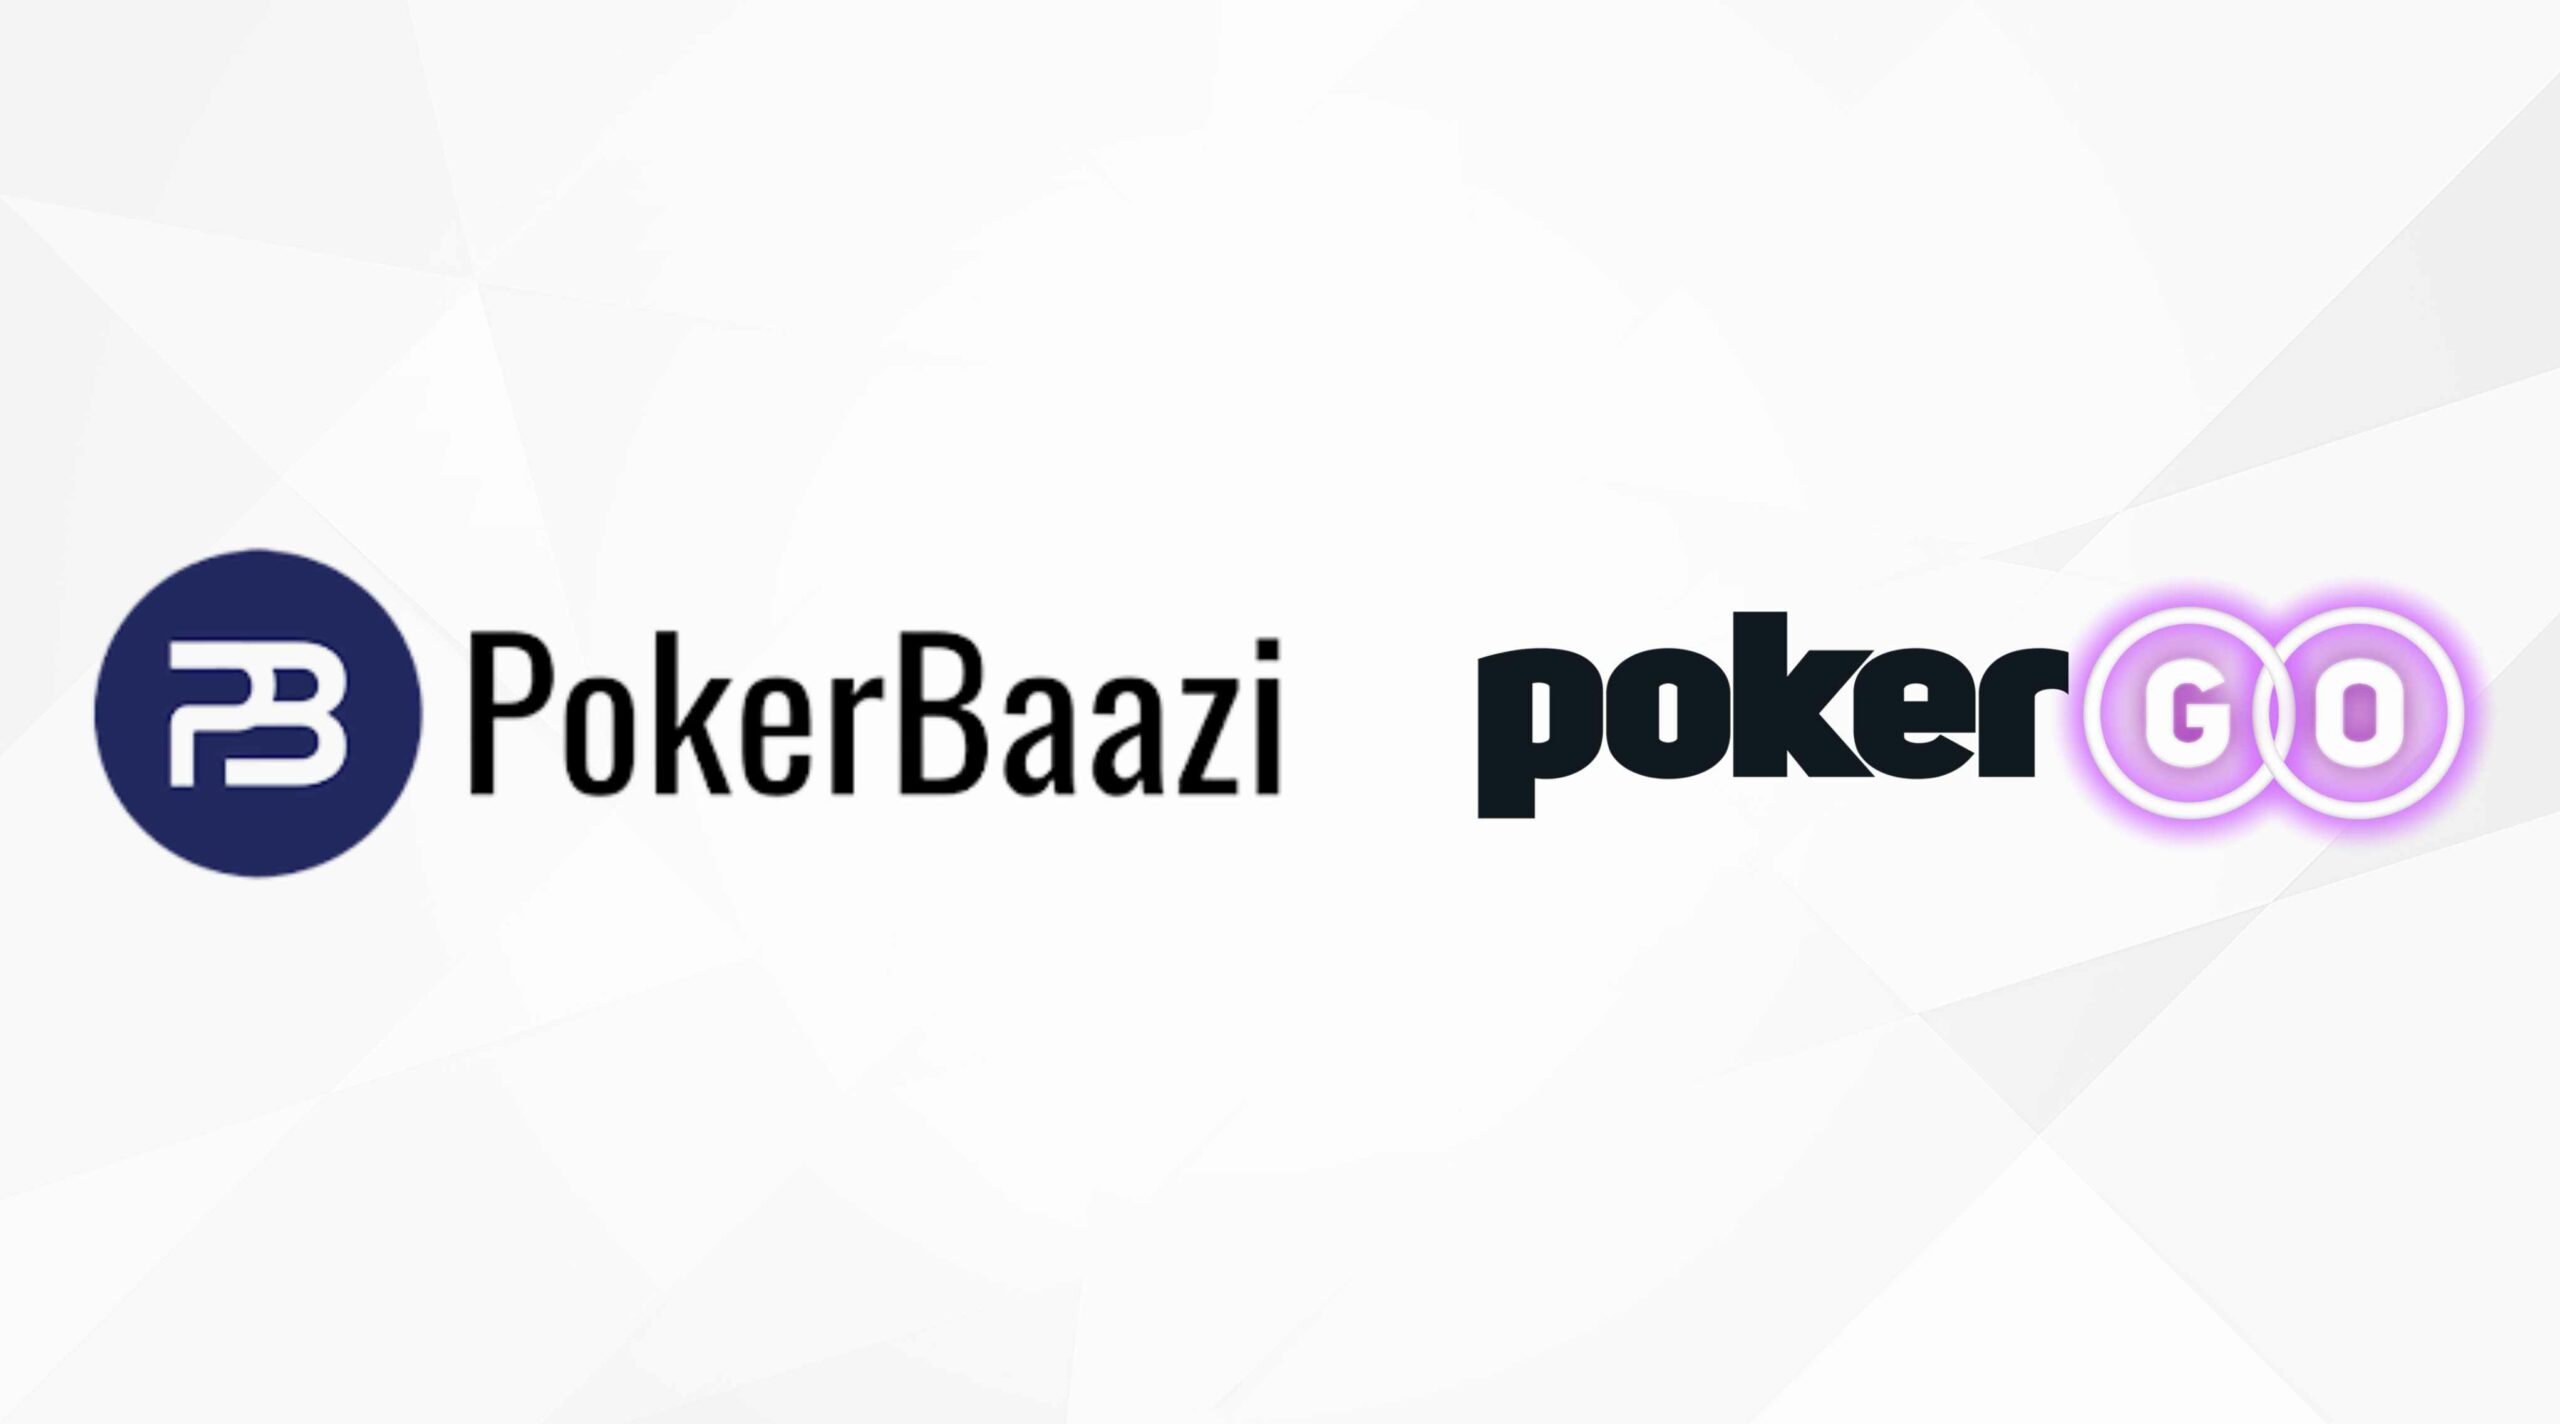 PokerBaazi teams up with PokerGO to deliver comprehensive collection of poker content in Hindi